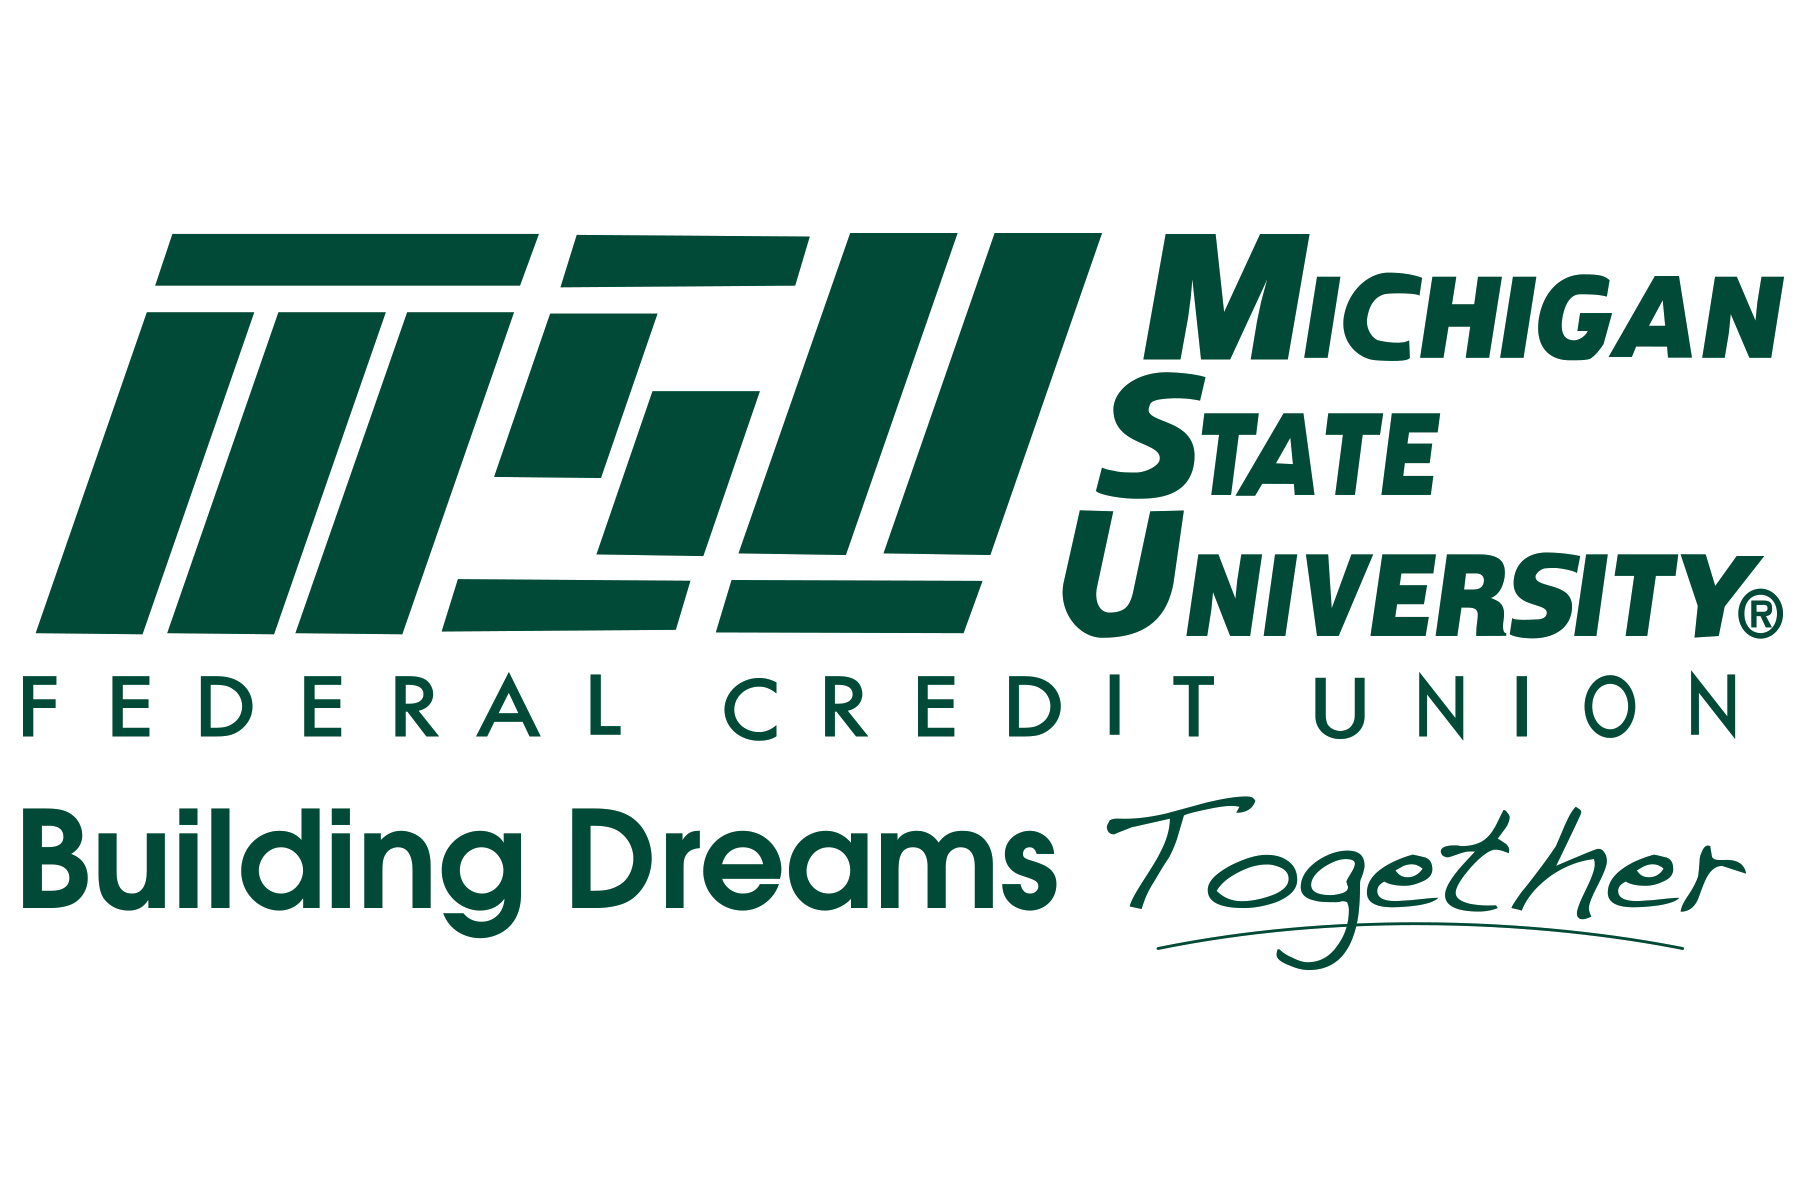  - Logo - https://s39939.pcdn.co/wp-content/uploads/2020/05/MSU-Federal-Credit-Union_Internal-Comms-Team_1-to-9.png